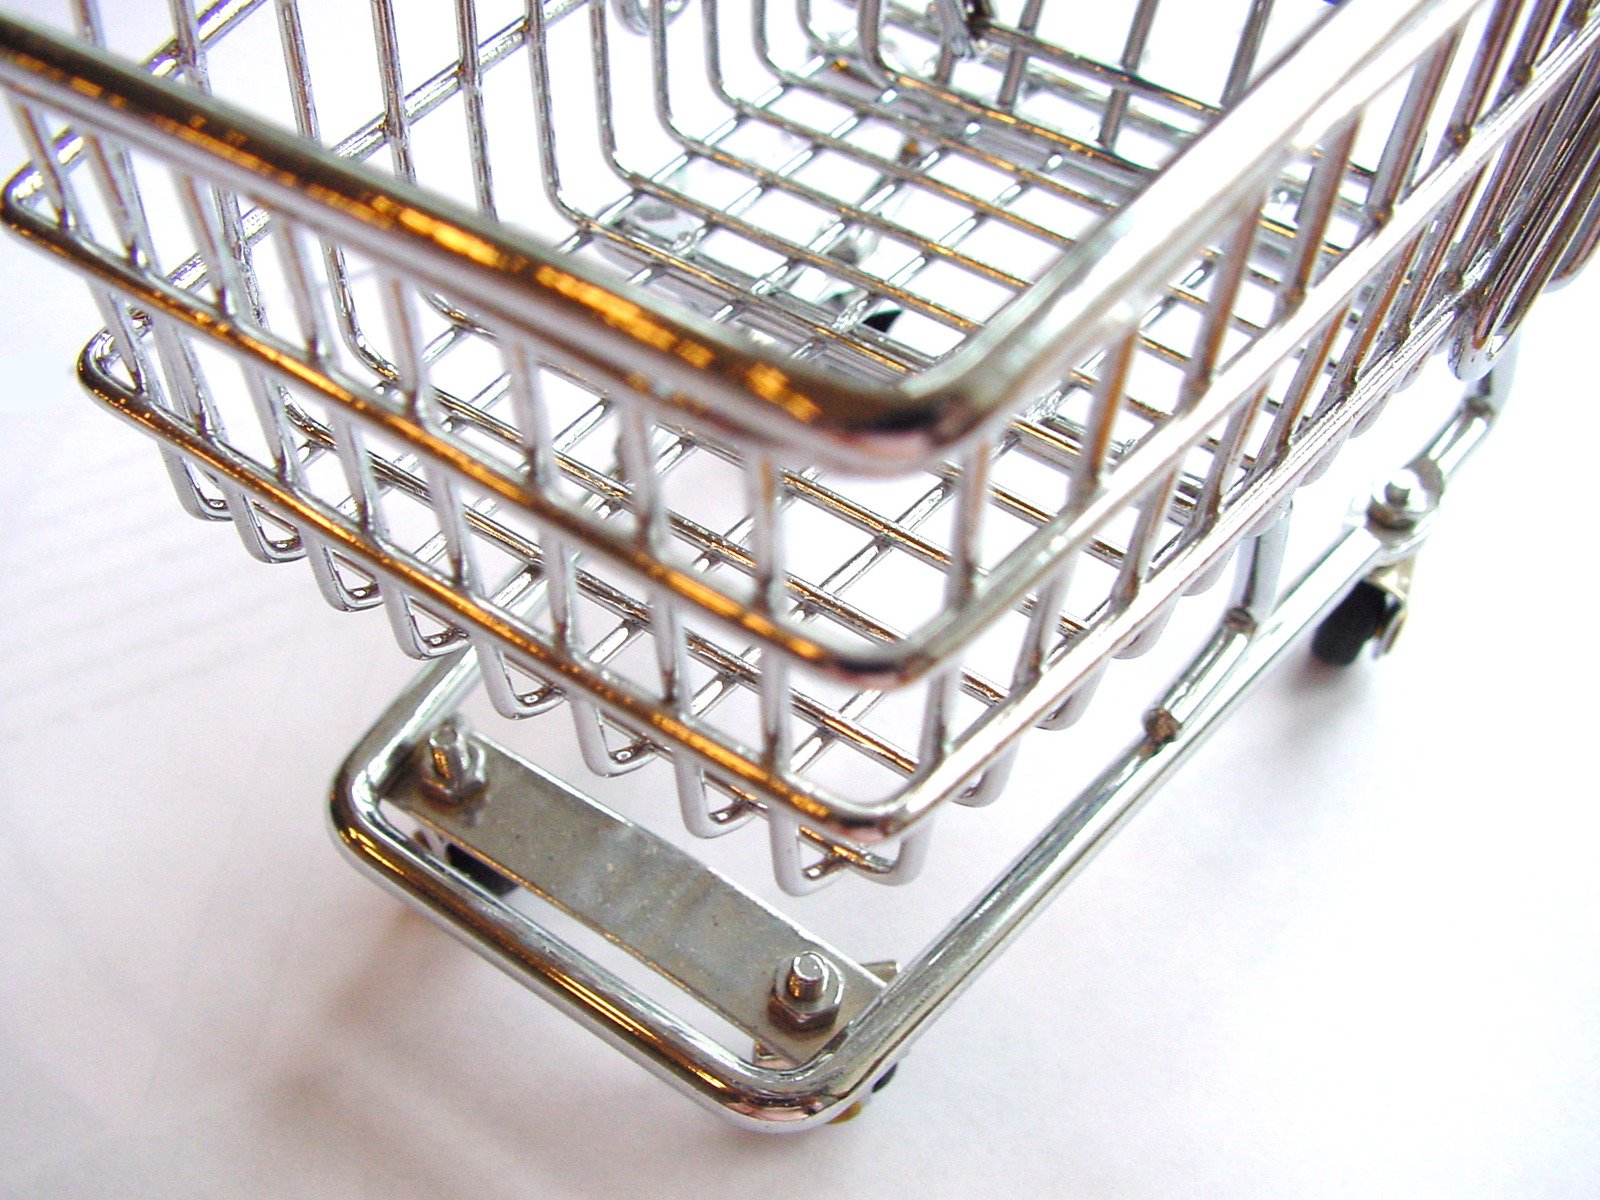 an image of a shopping cart or trolley